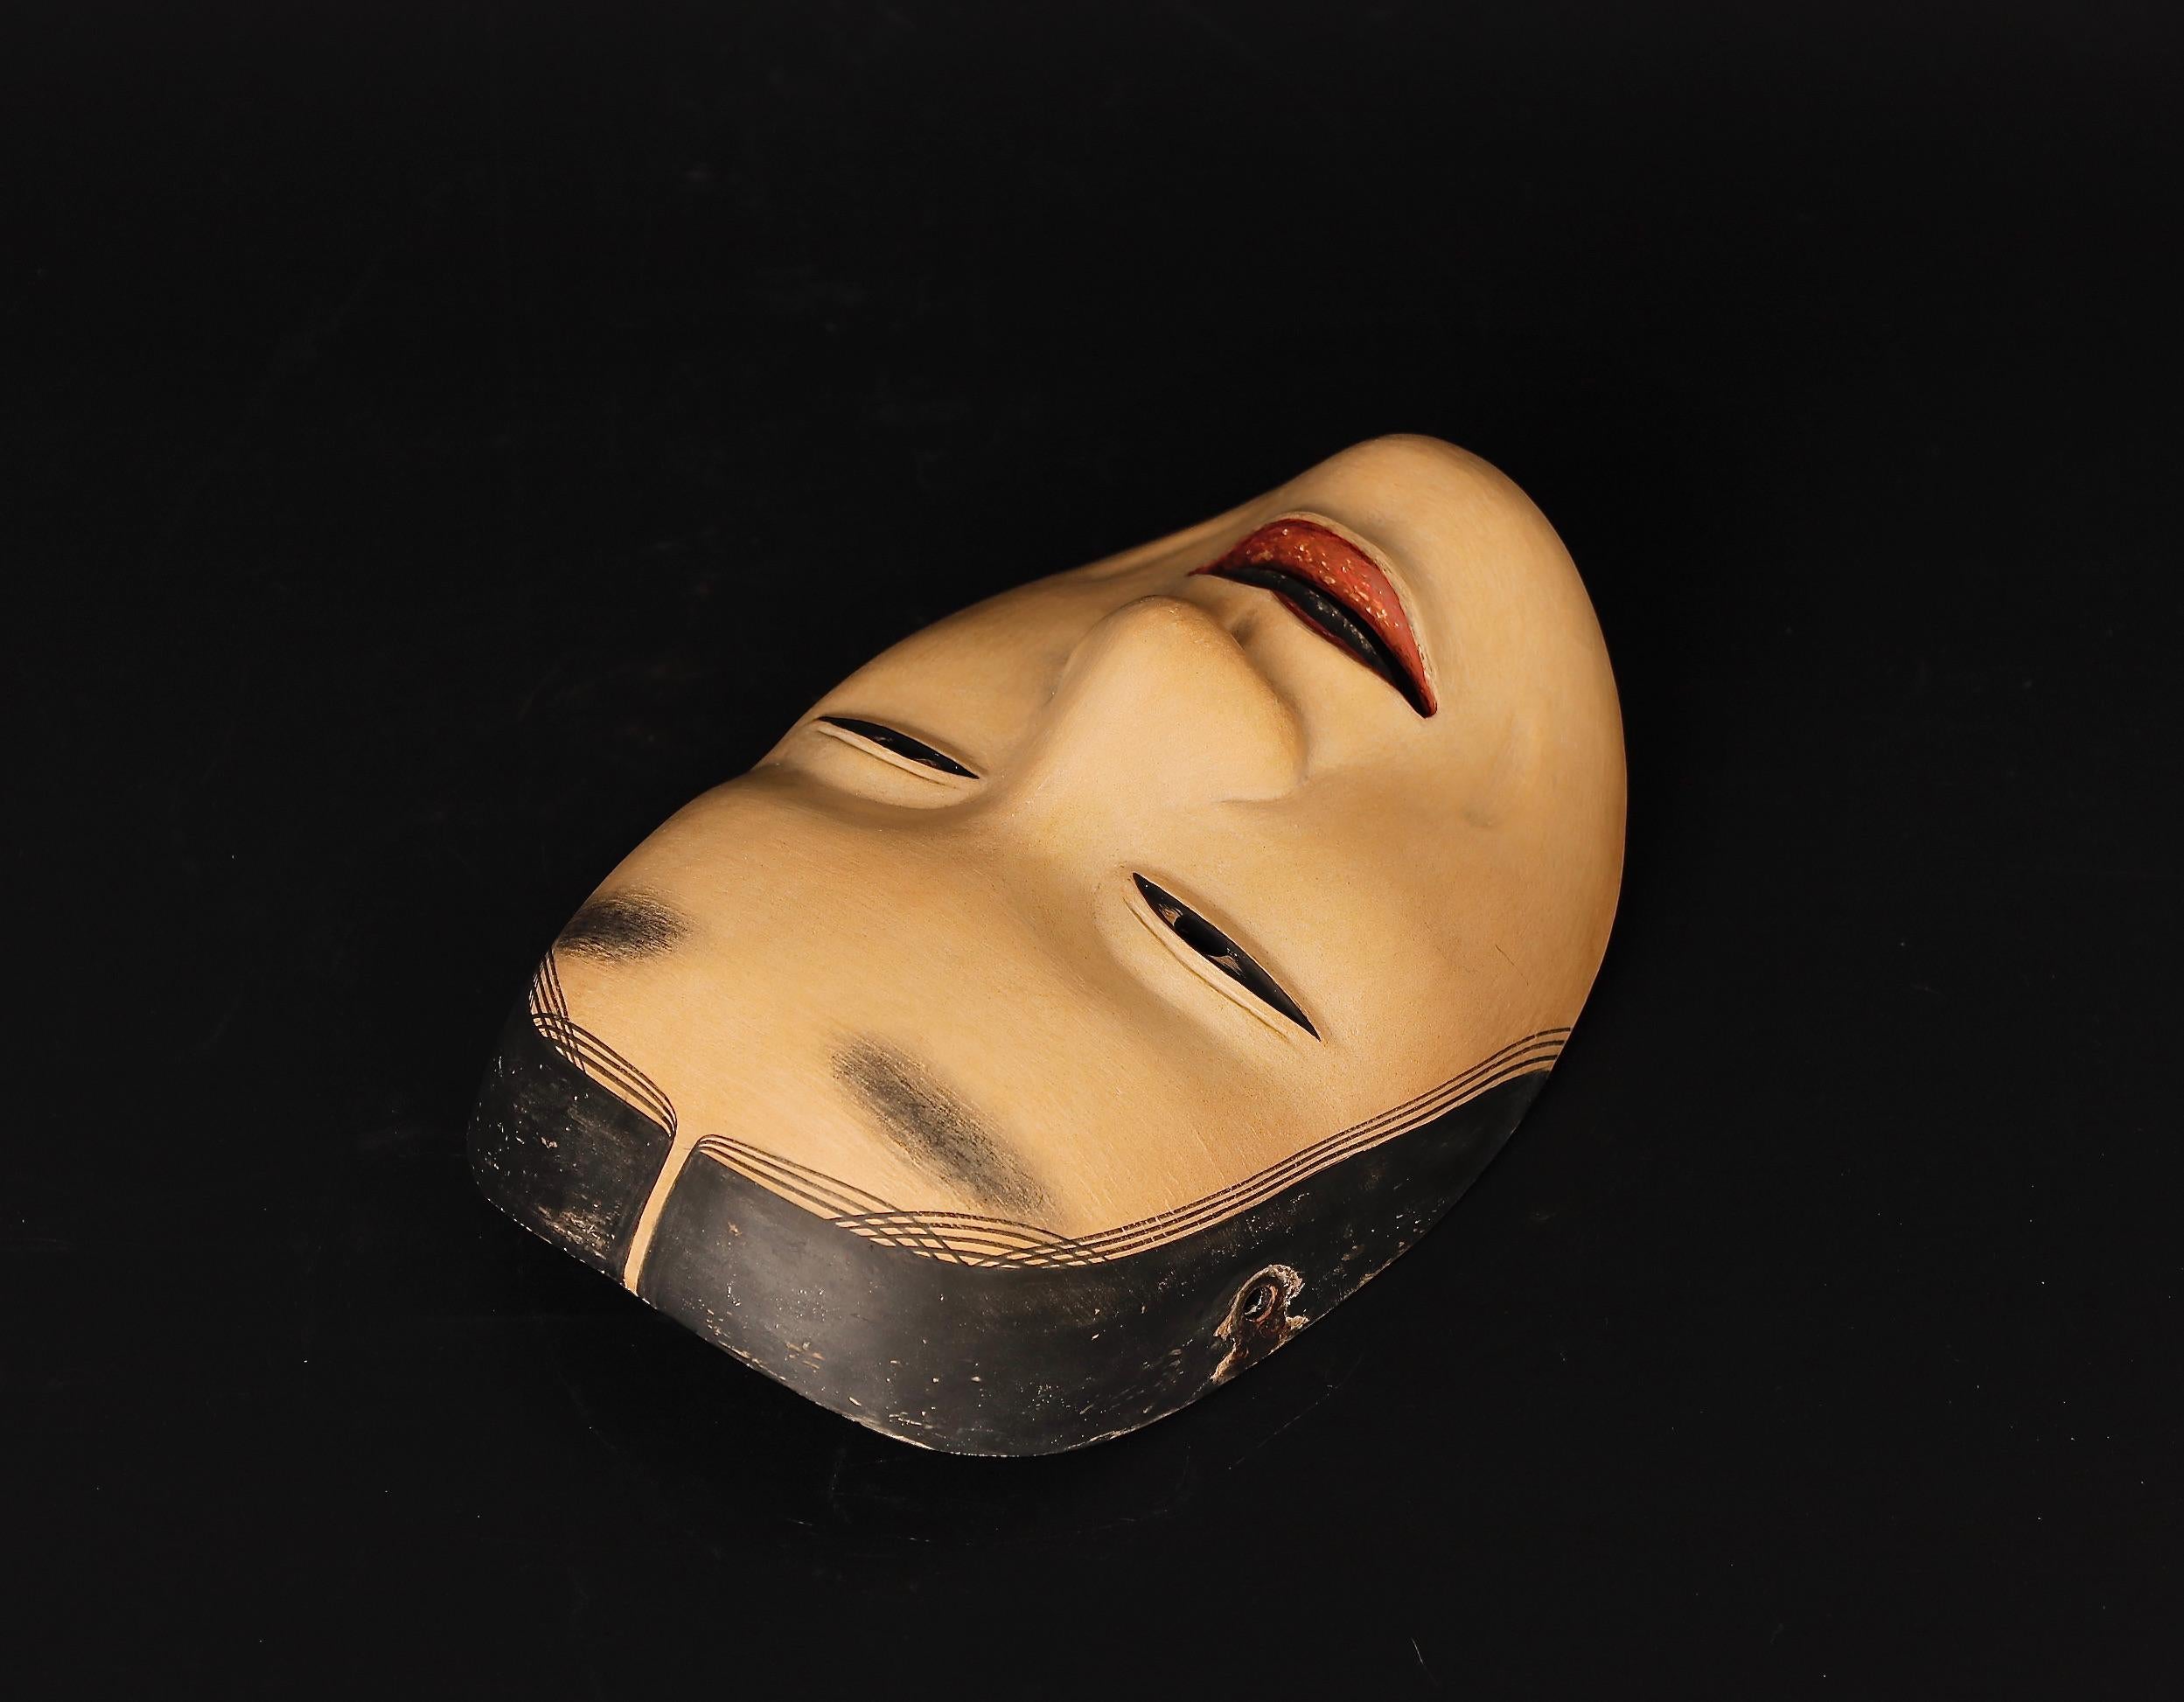 Authentic Japanese Fukai Noh Mask Depicting Heartbreak of a Middle-Aged Woman For Sale 2